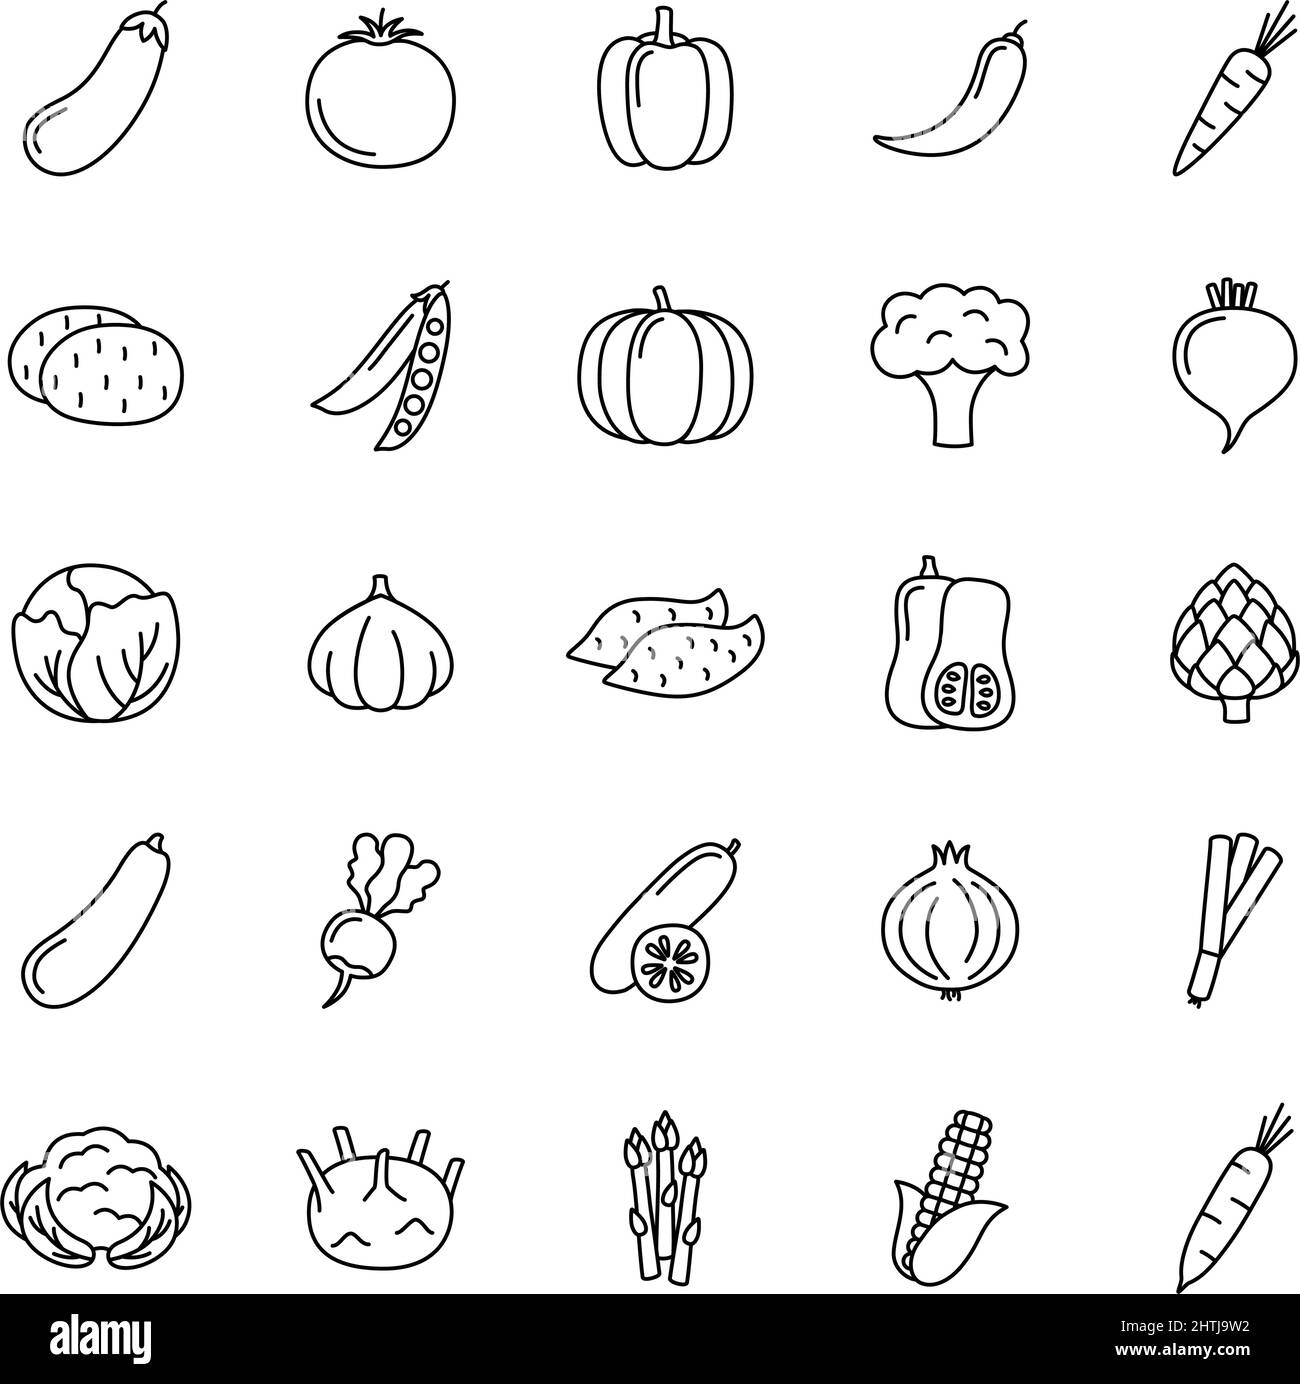 Set of line icons of vegetables on white background, vector illustration Stock Vector